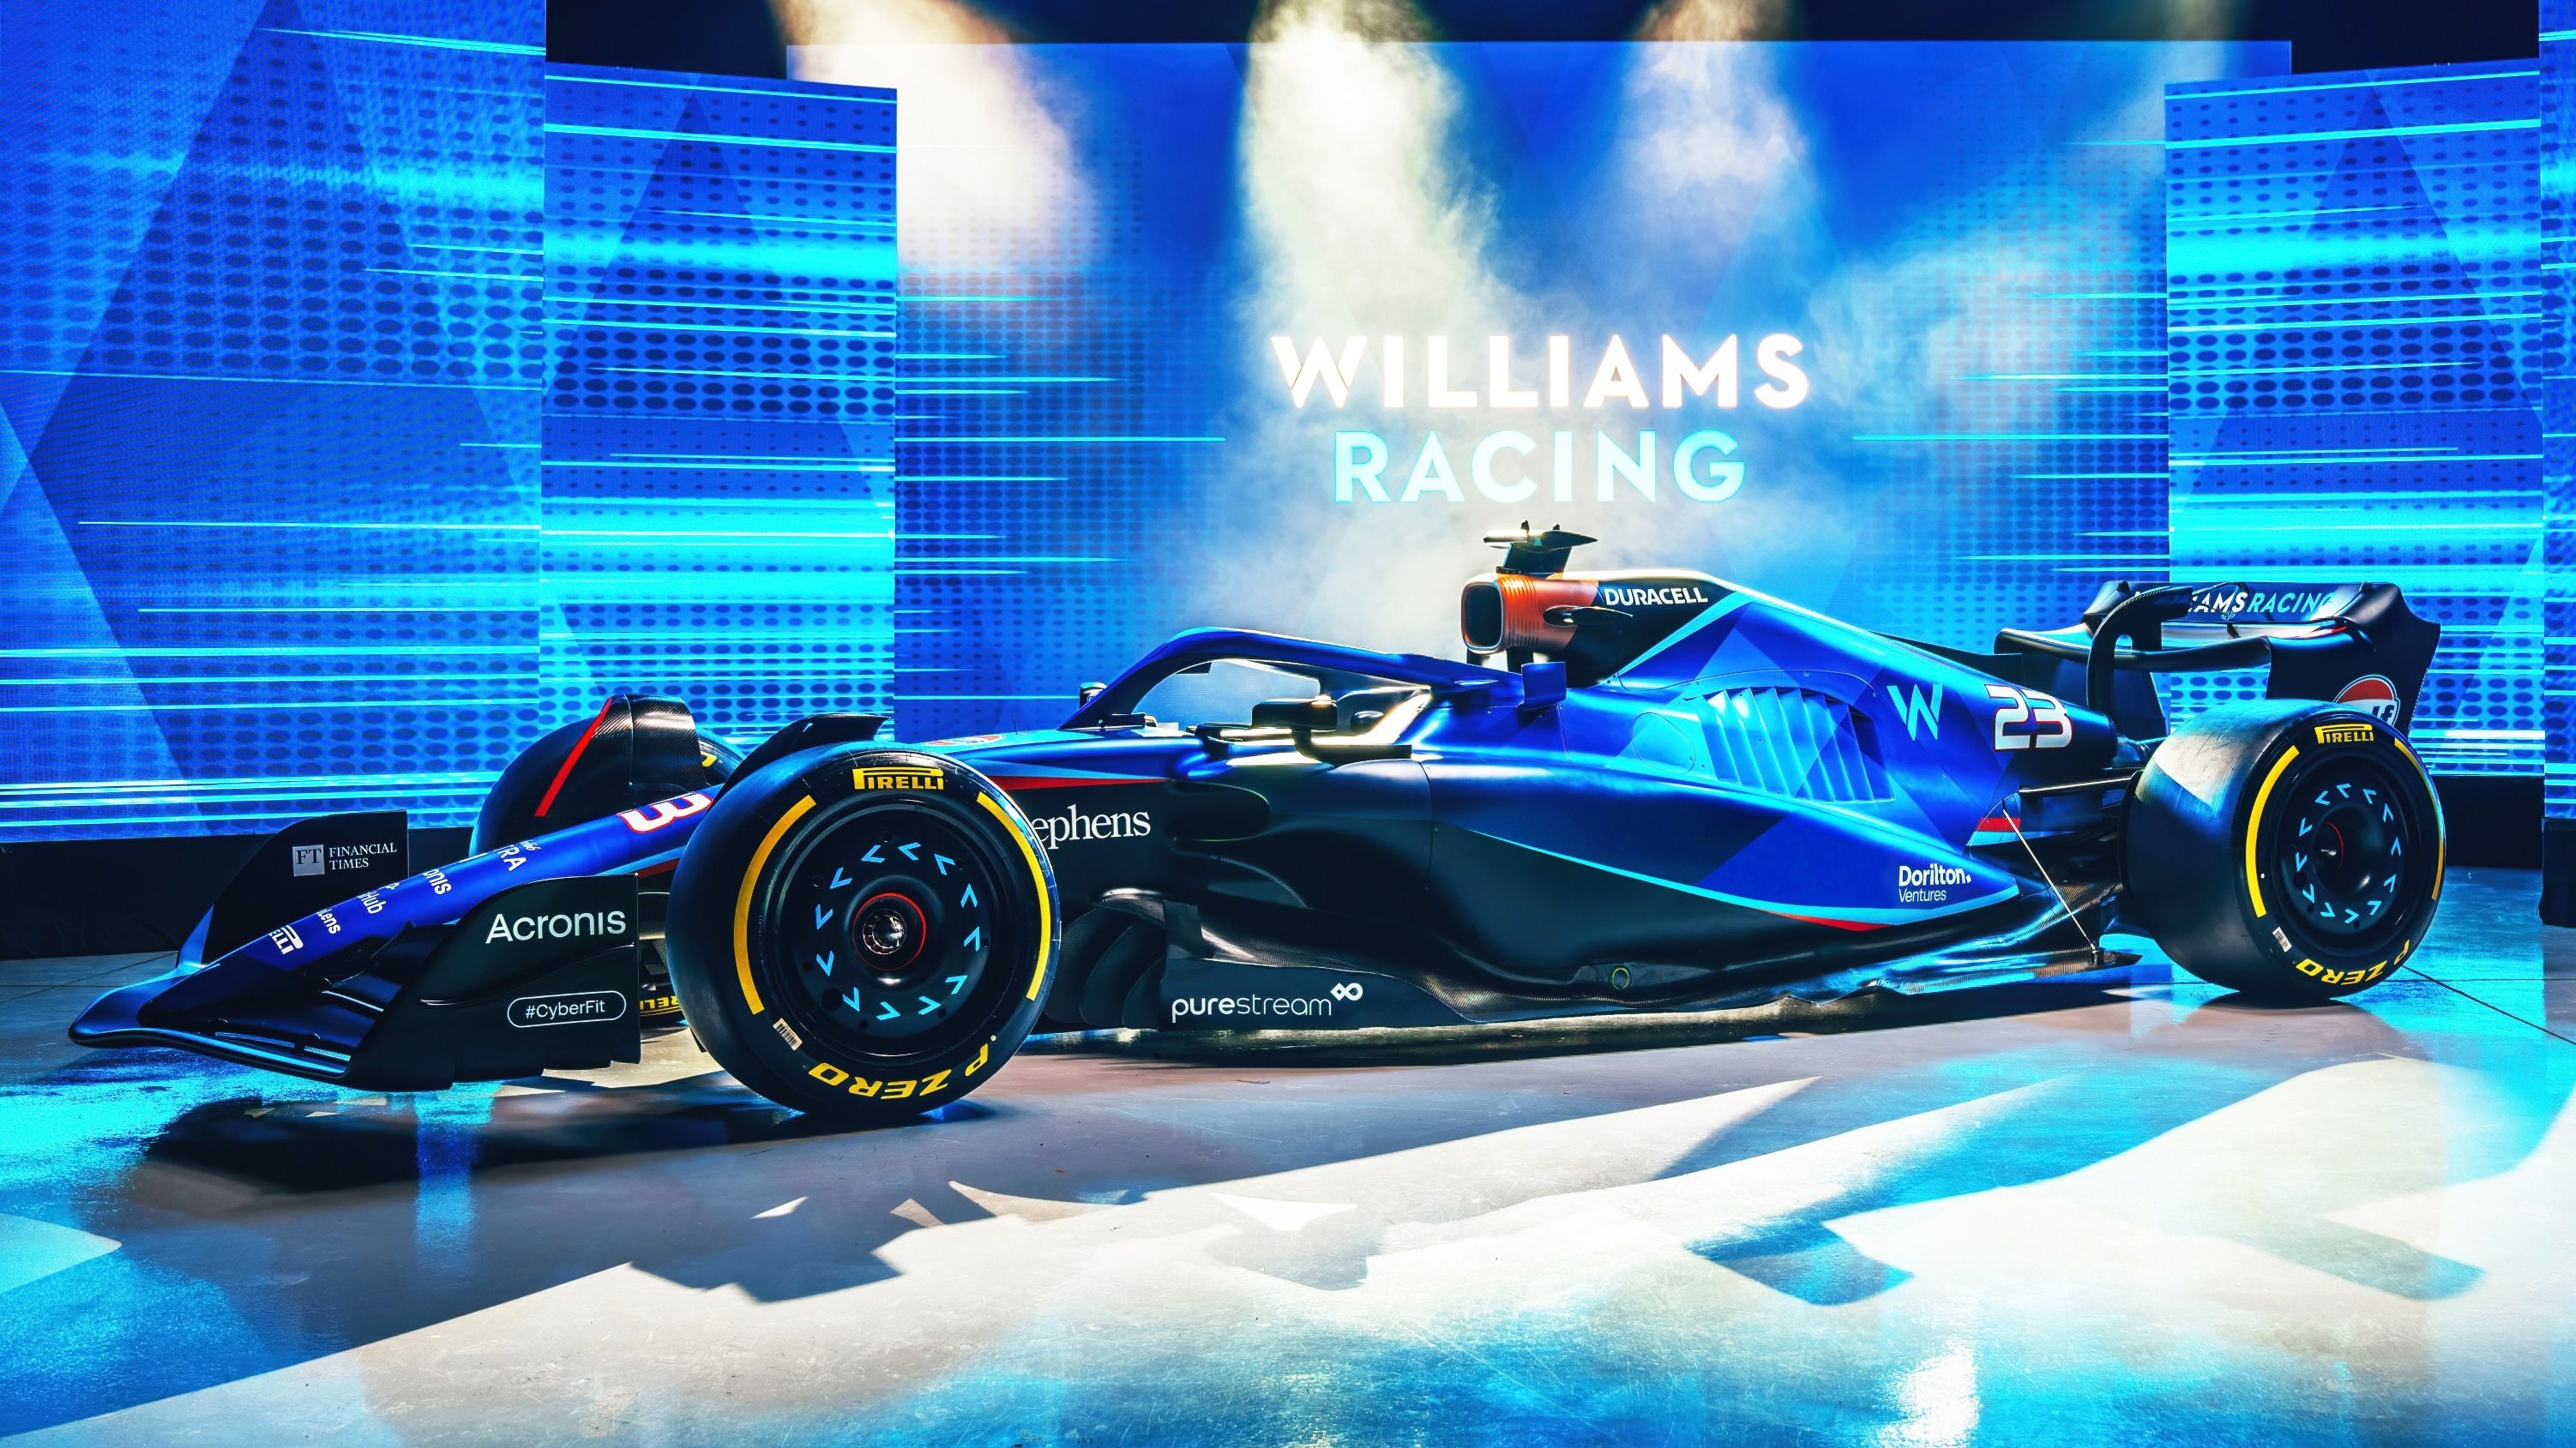 New 2023 livery and Team Partners unveiled | Williams Racing